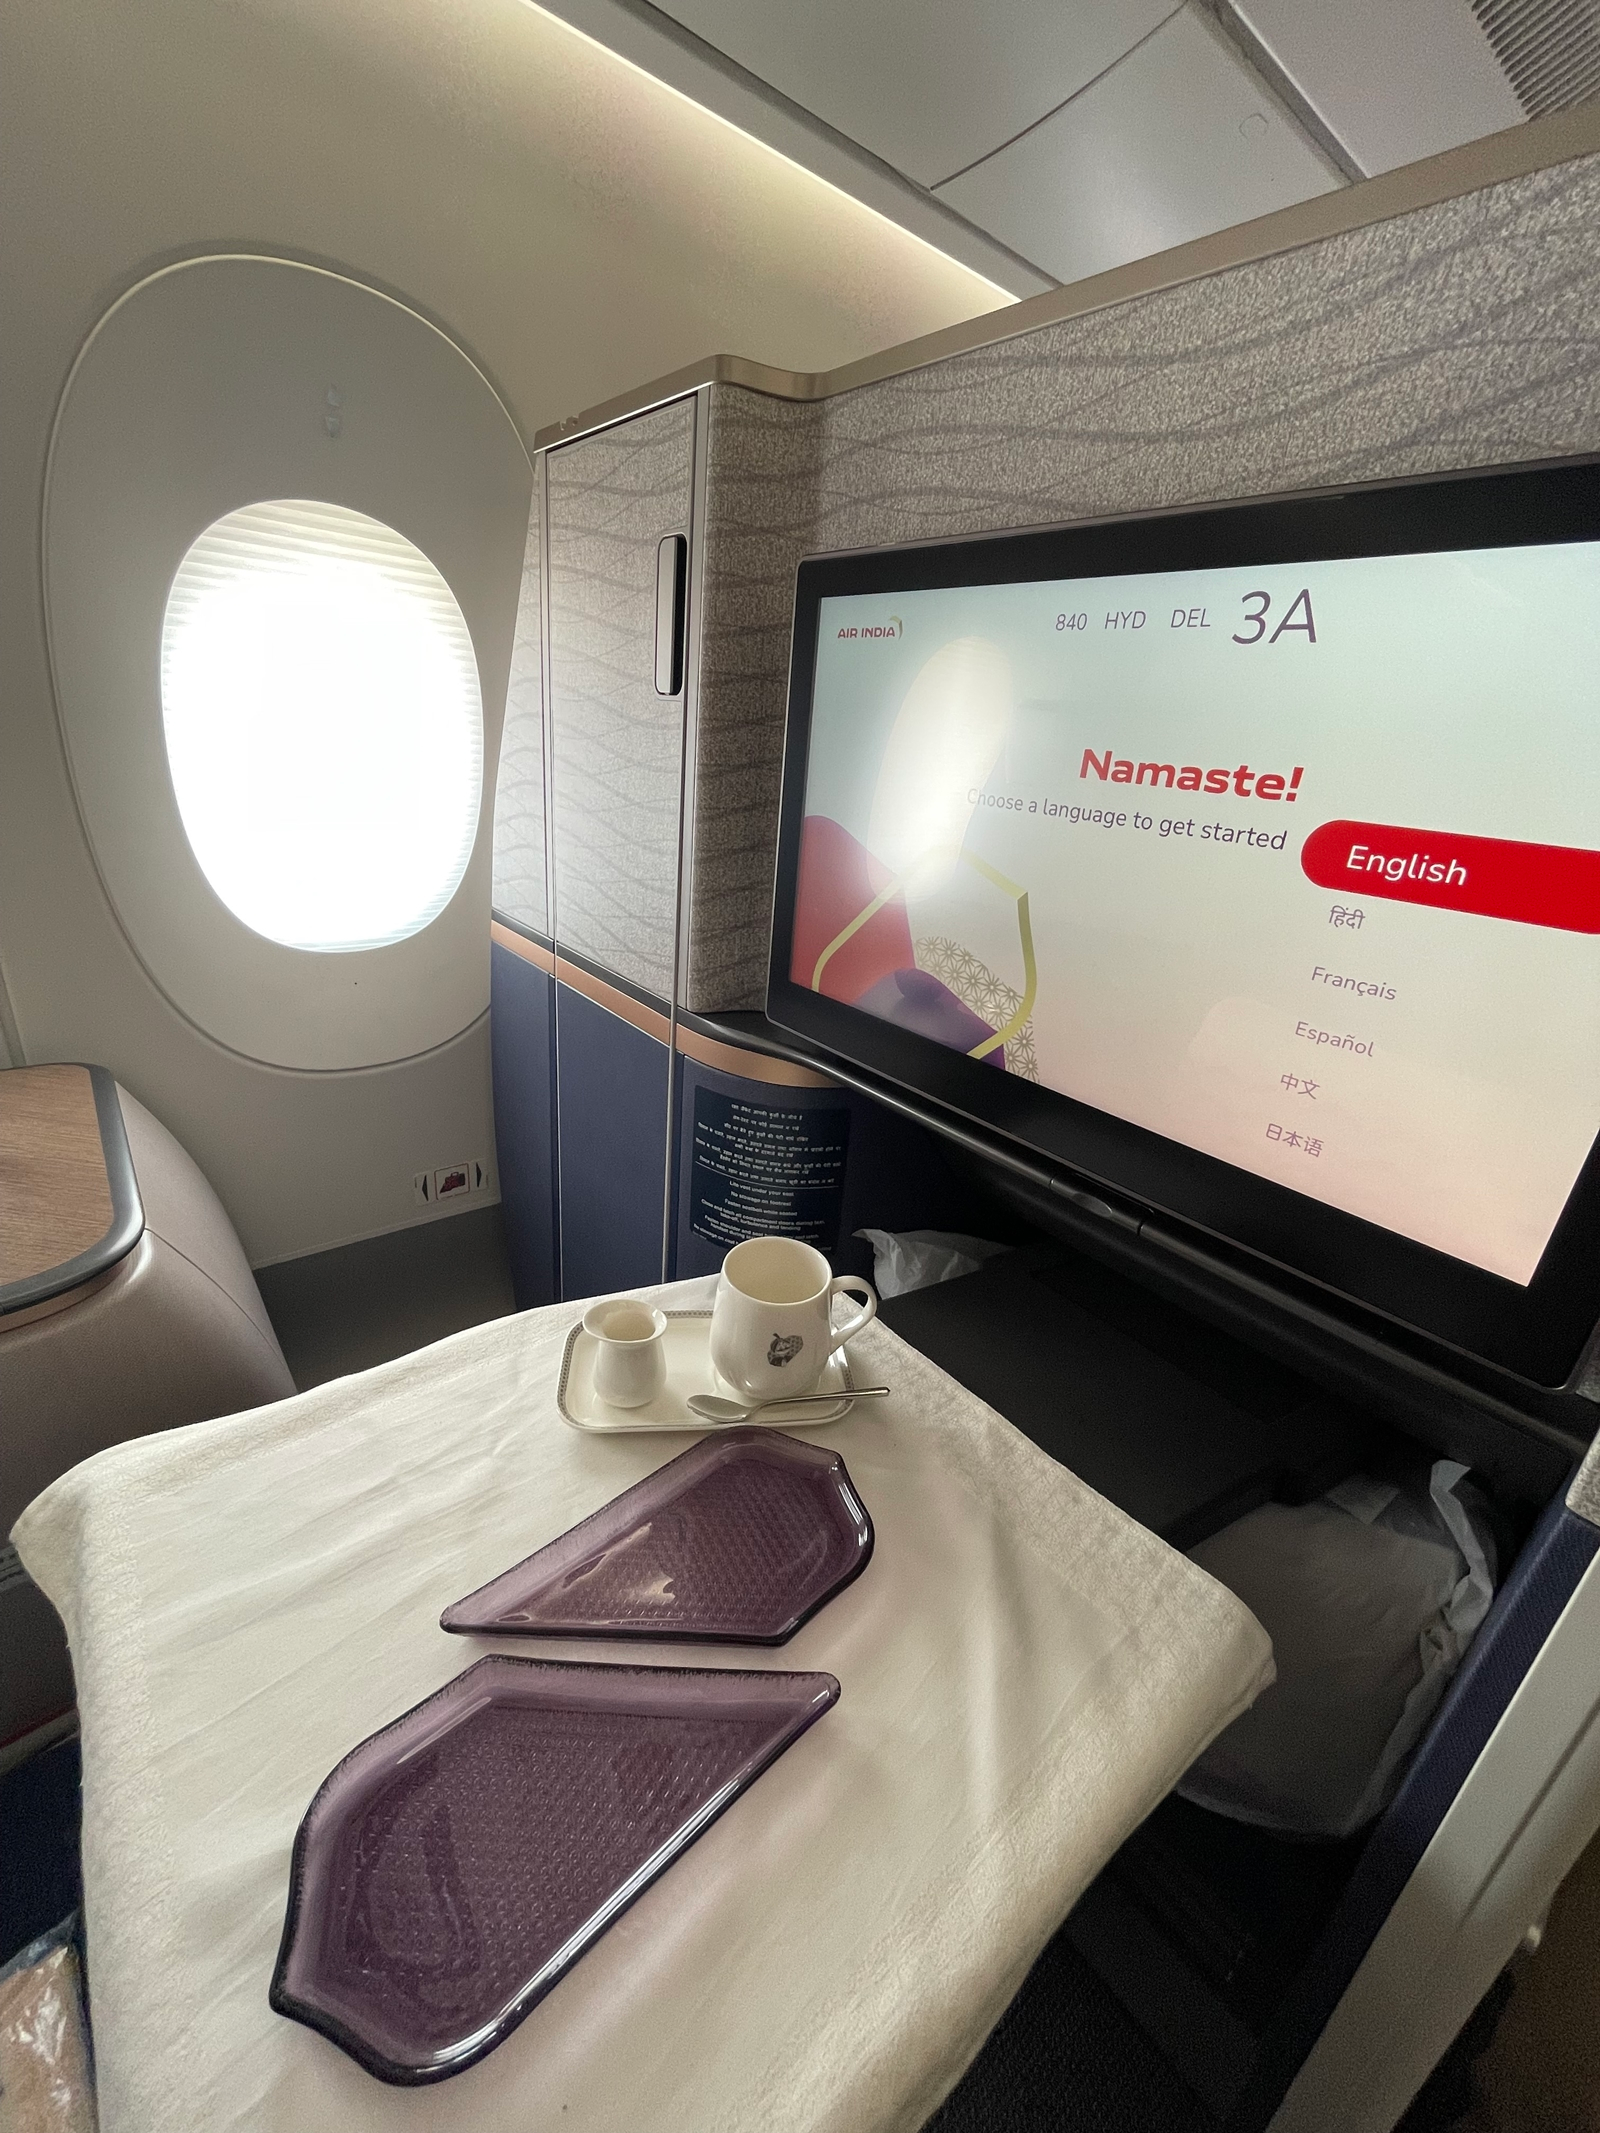 Business class on the aircraft features 28 private suites in a 1-2-1 configuration